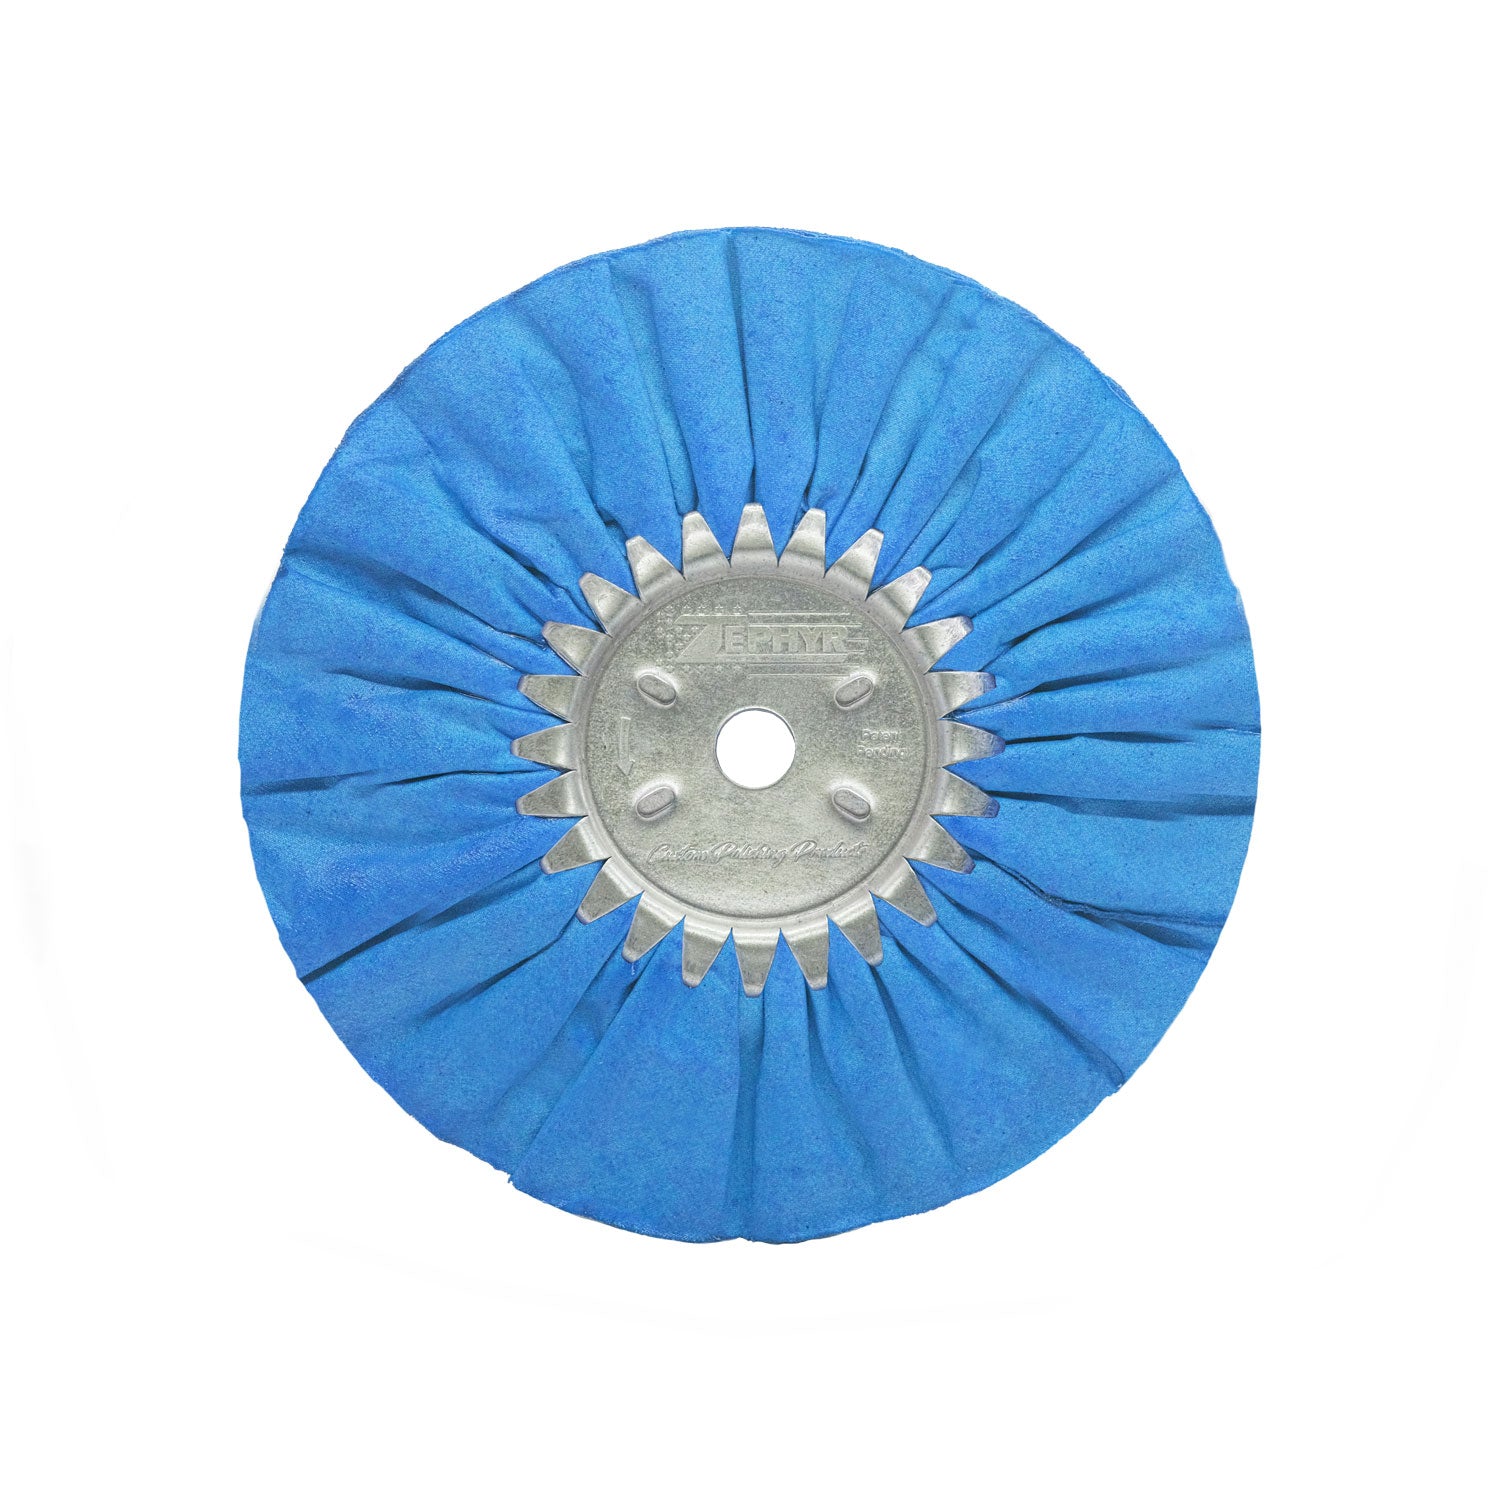 14 x 5 x 1-1/4 Airway Buffing Wheels for Industrial Polishing Machines  (1-1/4 Arbor Hole)